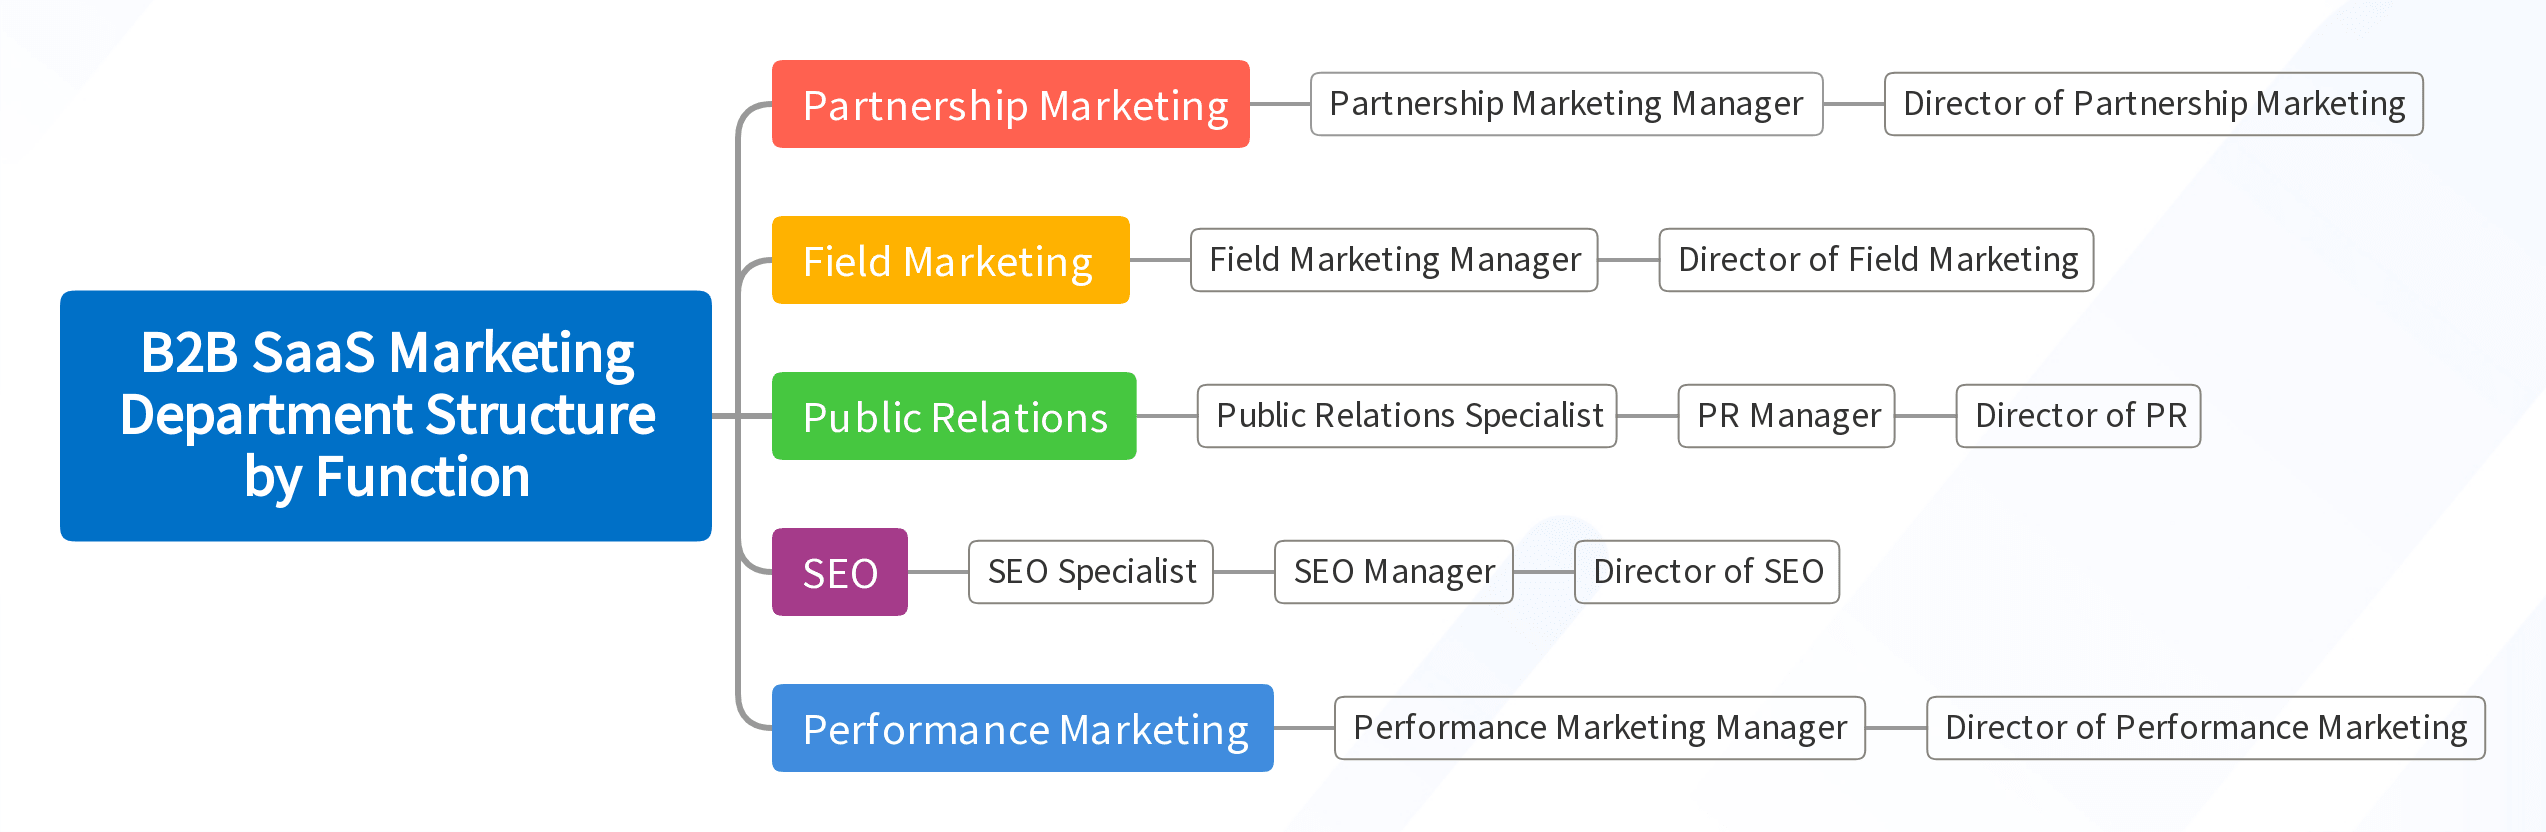 B2B SaaS Marketing Department Structure by Function